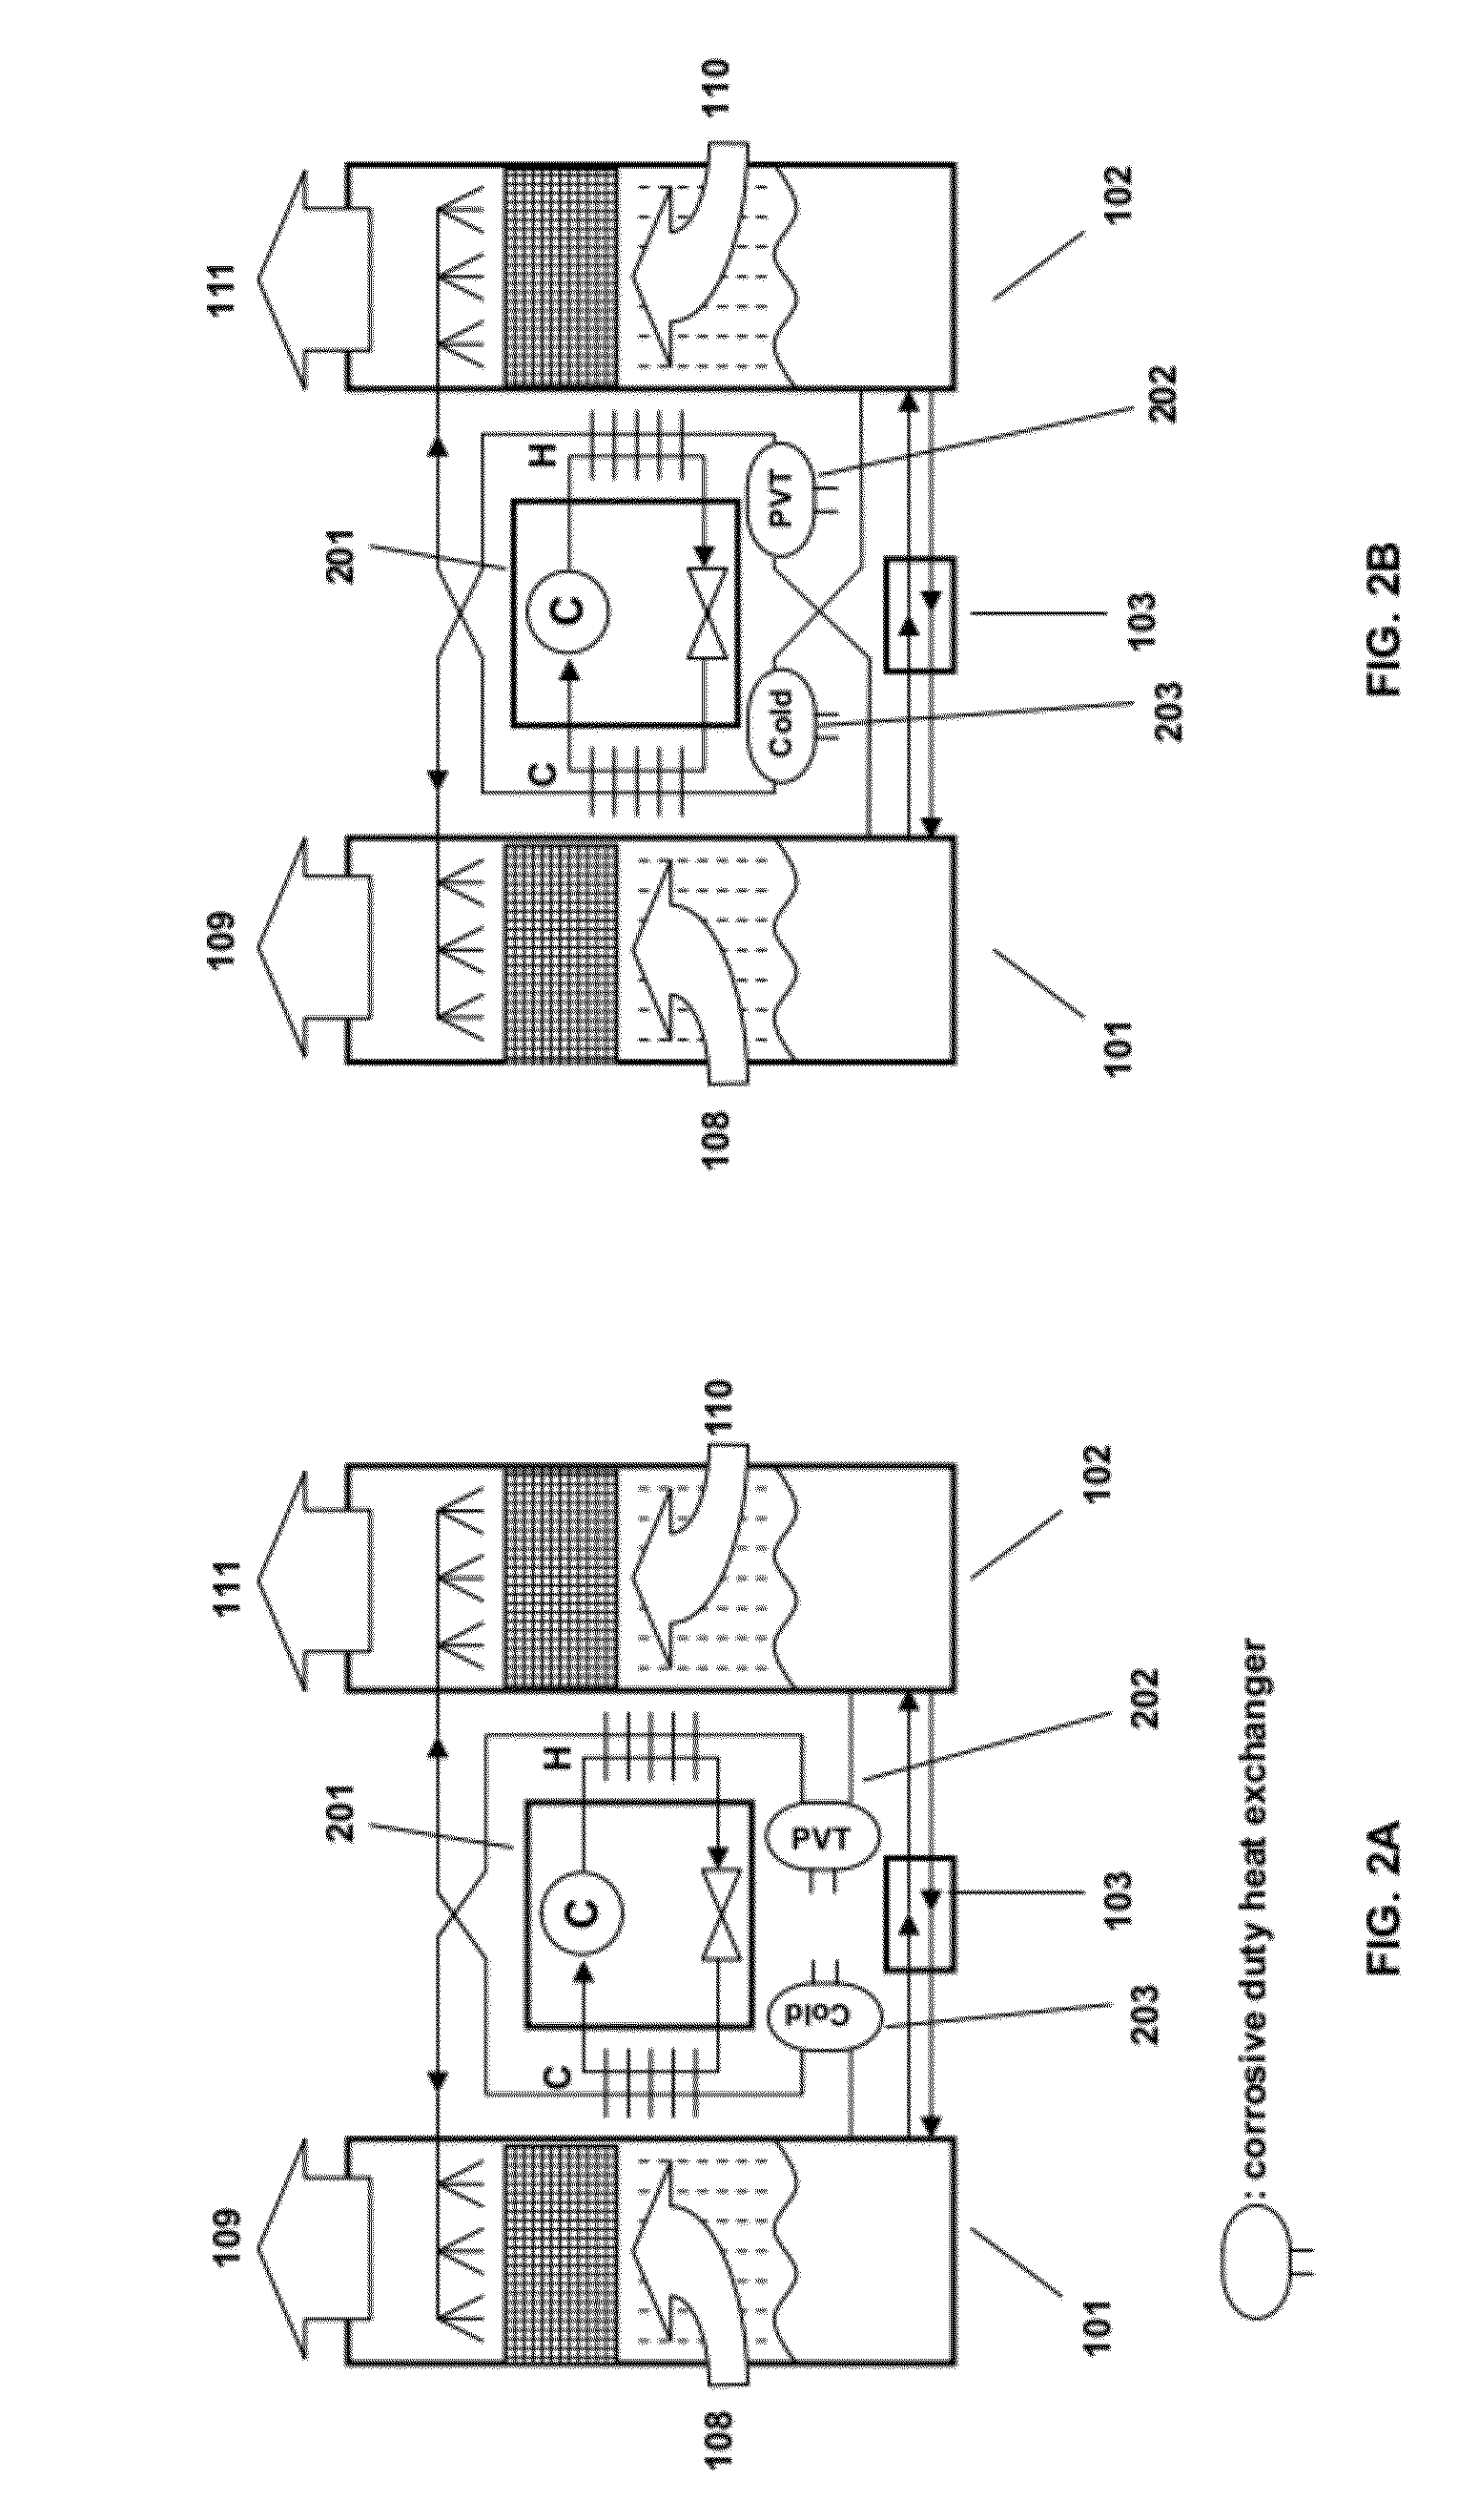 Air conditioning system with integrated solar inverter